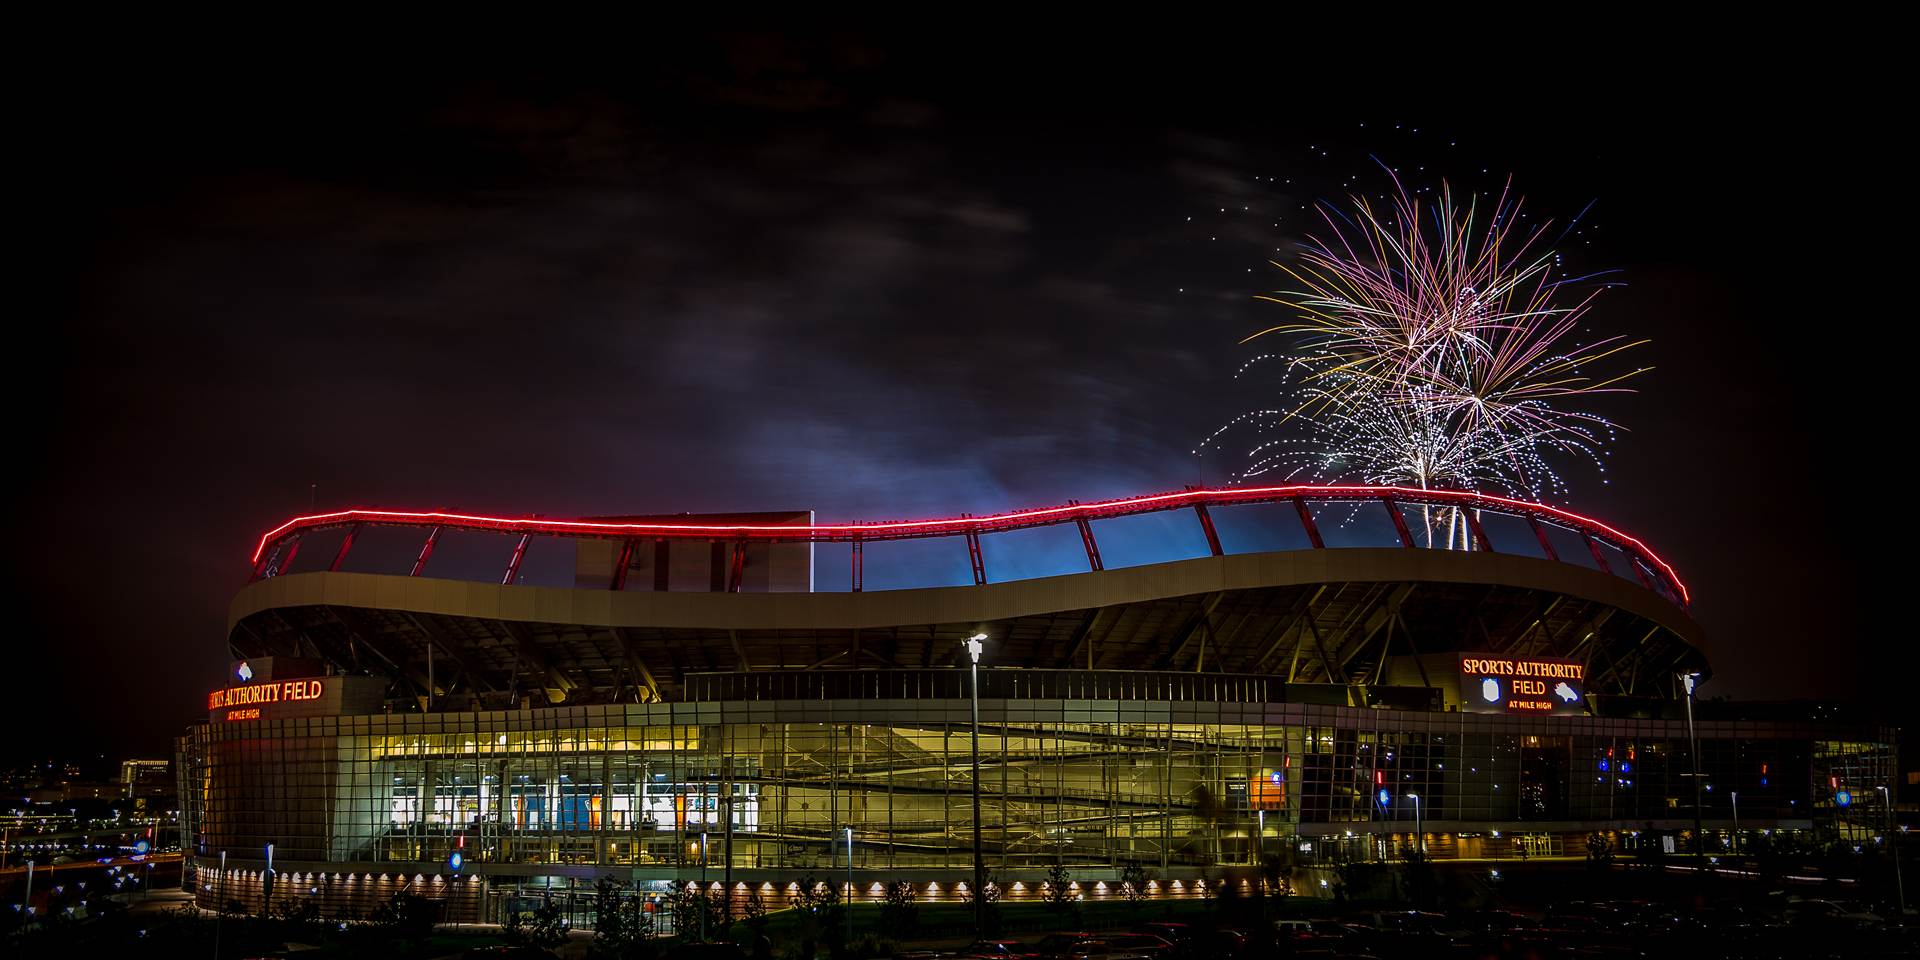 Fireworks at Mile High Stadium - Fireworks over Mile High Stadium in Denver, Colorado on the Fourth of July. by Scott Smith Photos